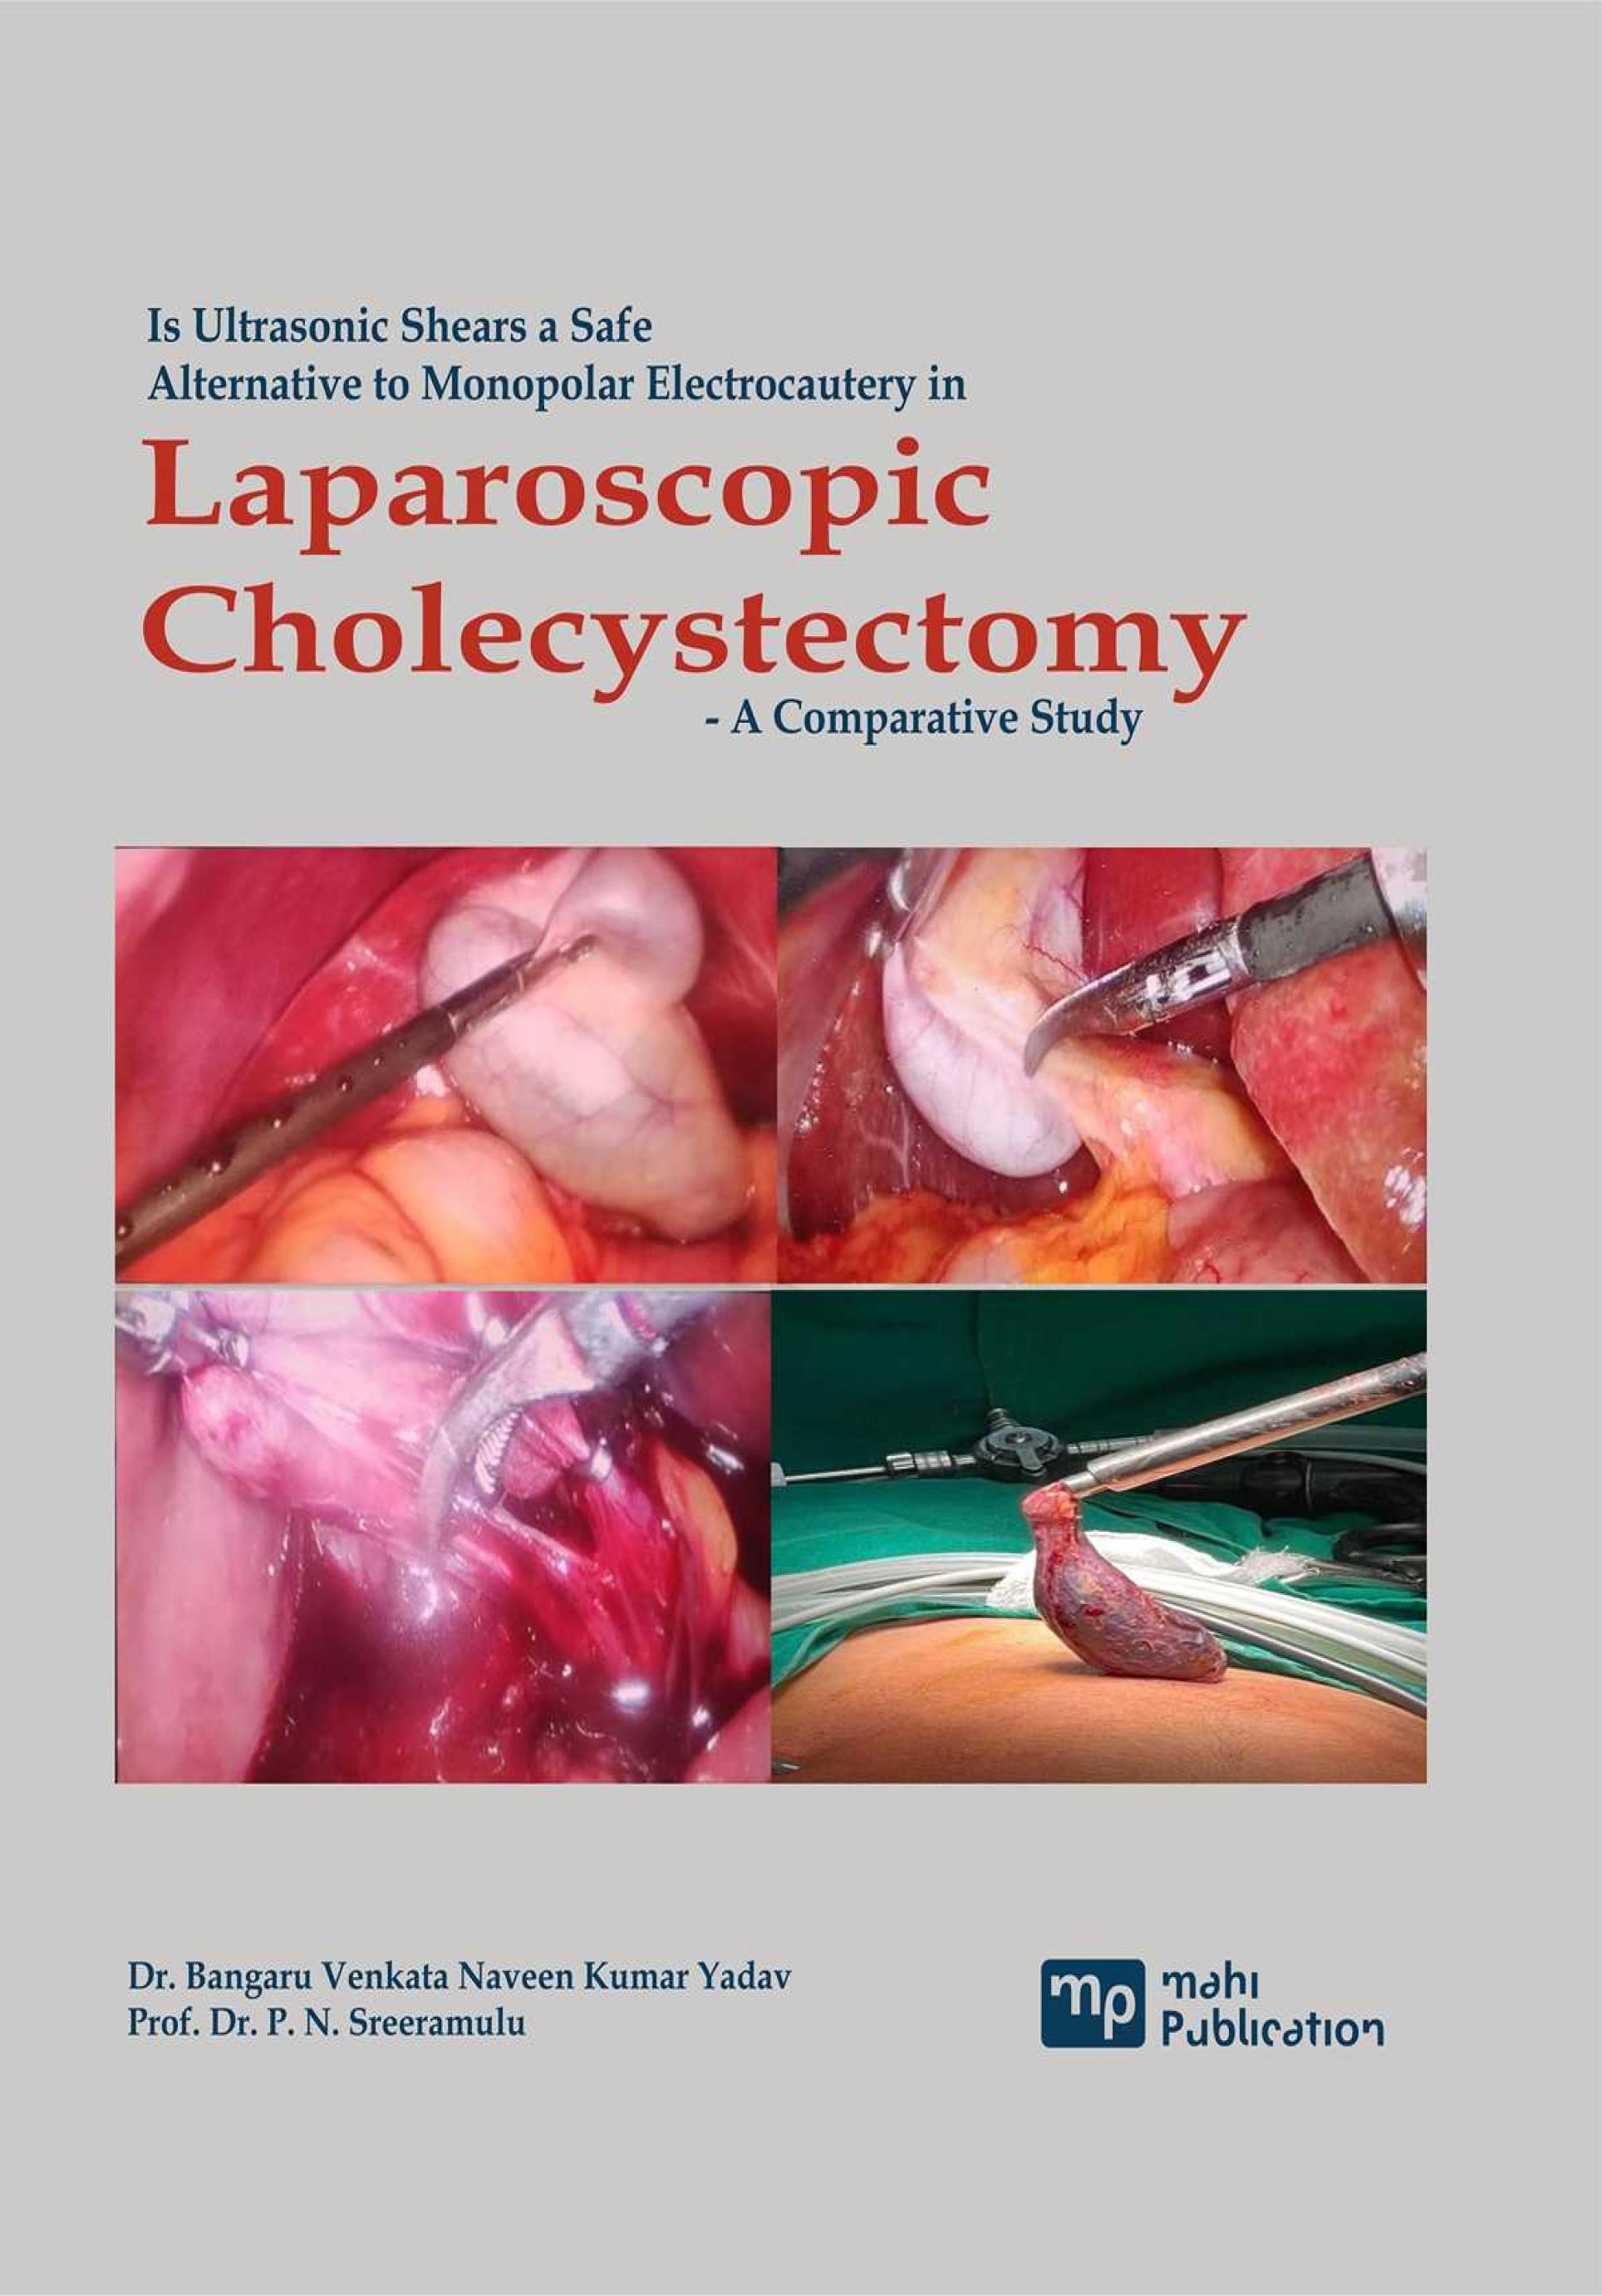 Is Ultrasonic Shears A Safe Alternative To Monopolar Electrocautery In Laparoscopic Cholecystectomy - A Comparative Study